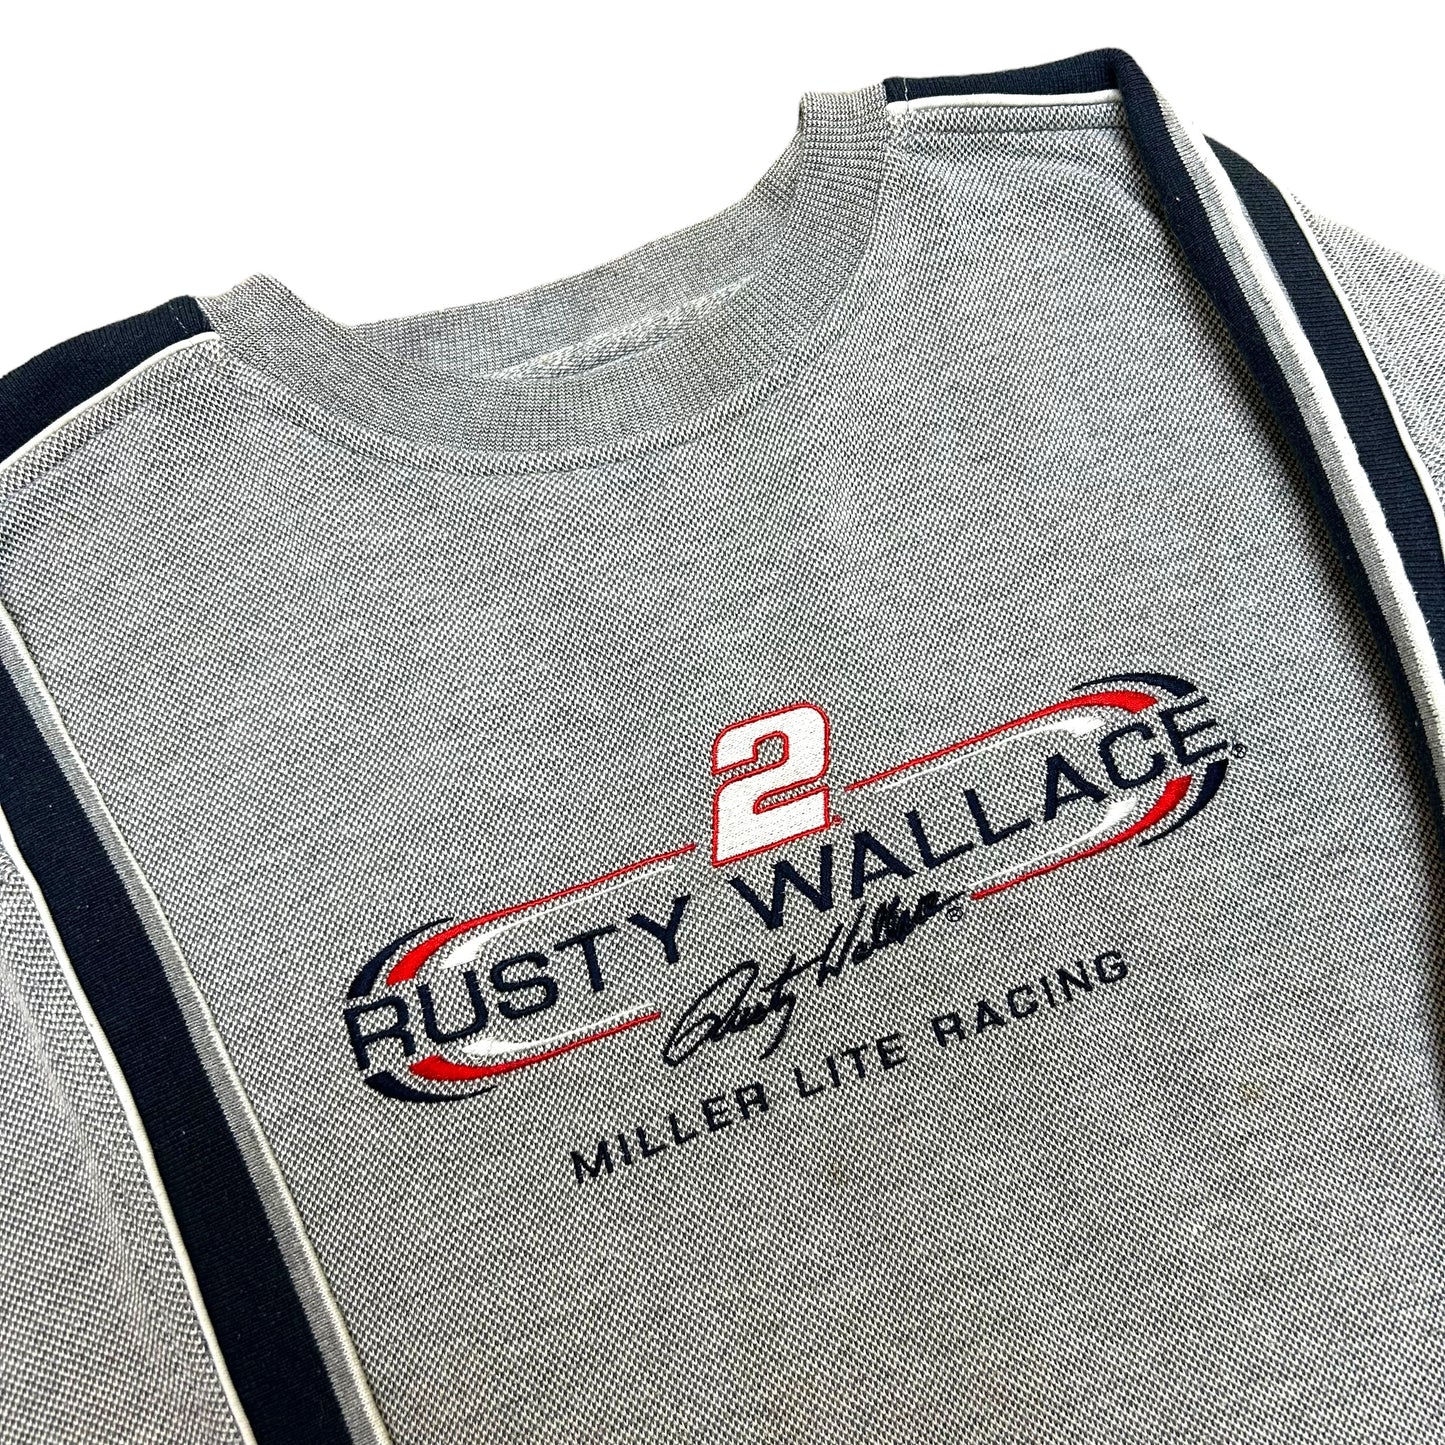 Y2K Chase Authentics Rusty Wallace Miller Lite Racing Grey Crewneck Sweatshirt - Size Large (Fits XL)